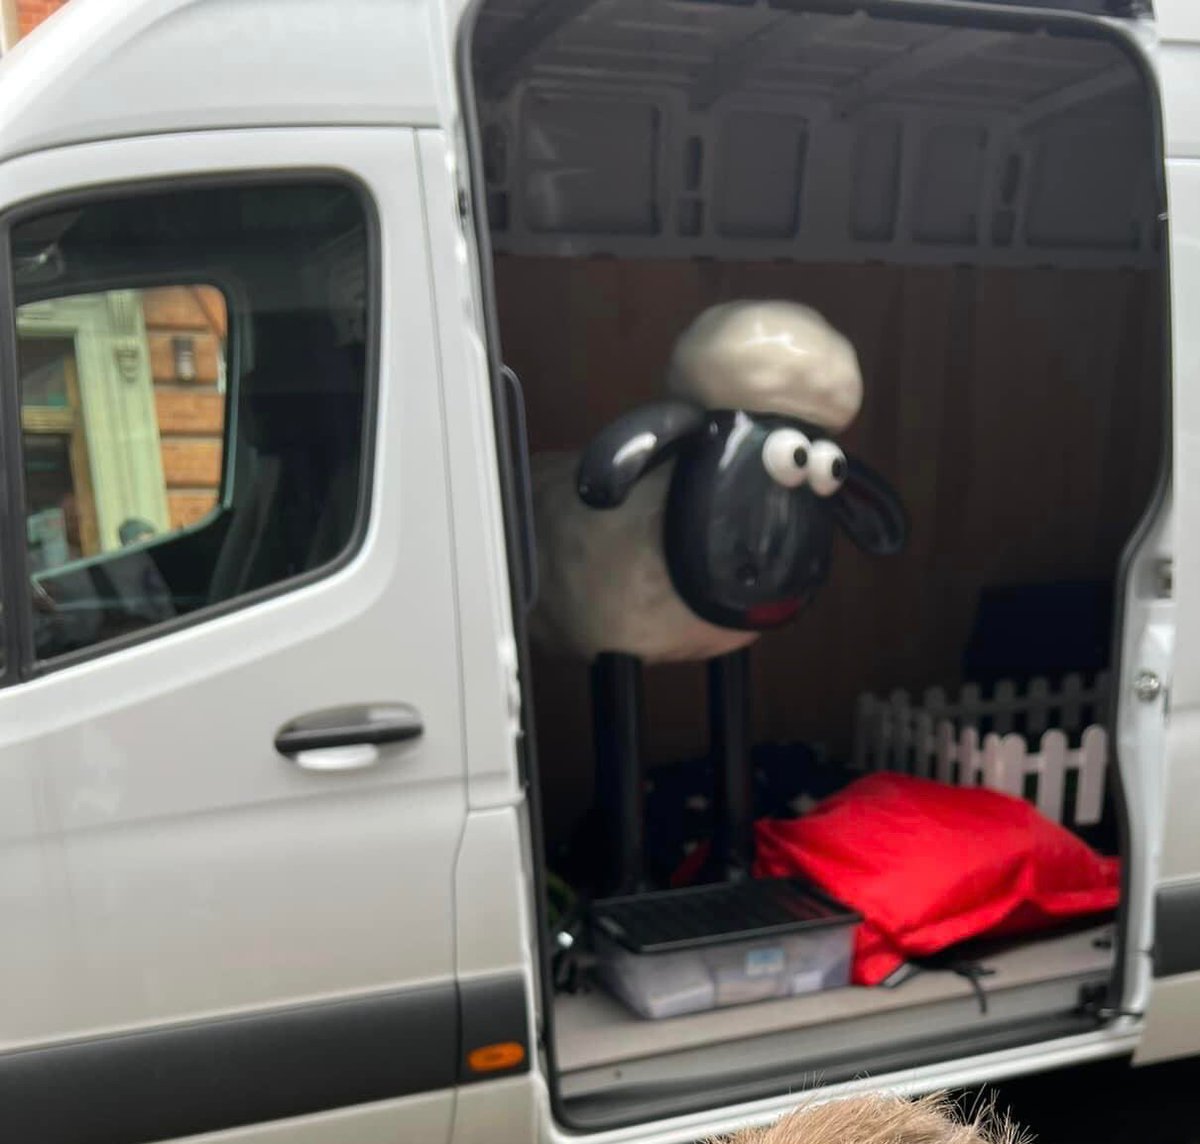 Look who’s arrived at our local shopping centre in #Gosforth @shaunonthetyne,looking forward to the full flock arriving on Tyneside later this year #Sheep365 shaunonthetyne.co.uk